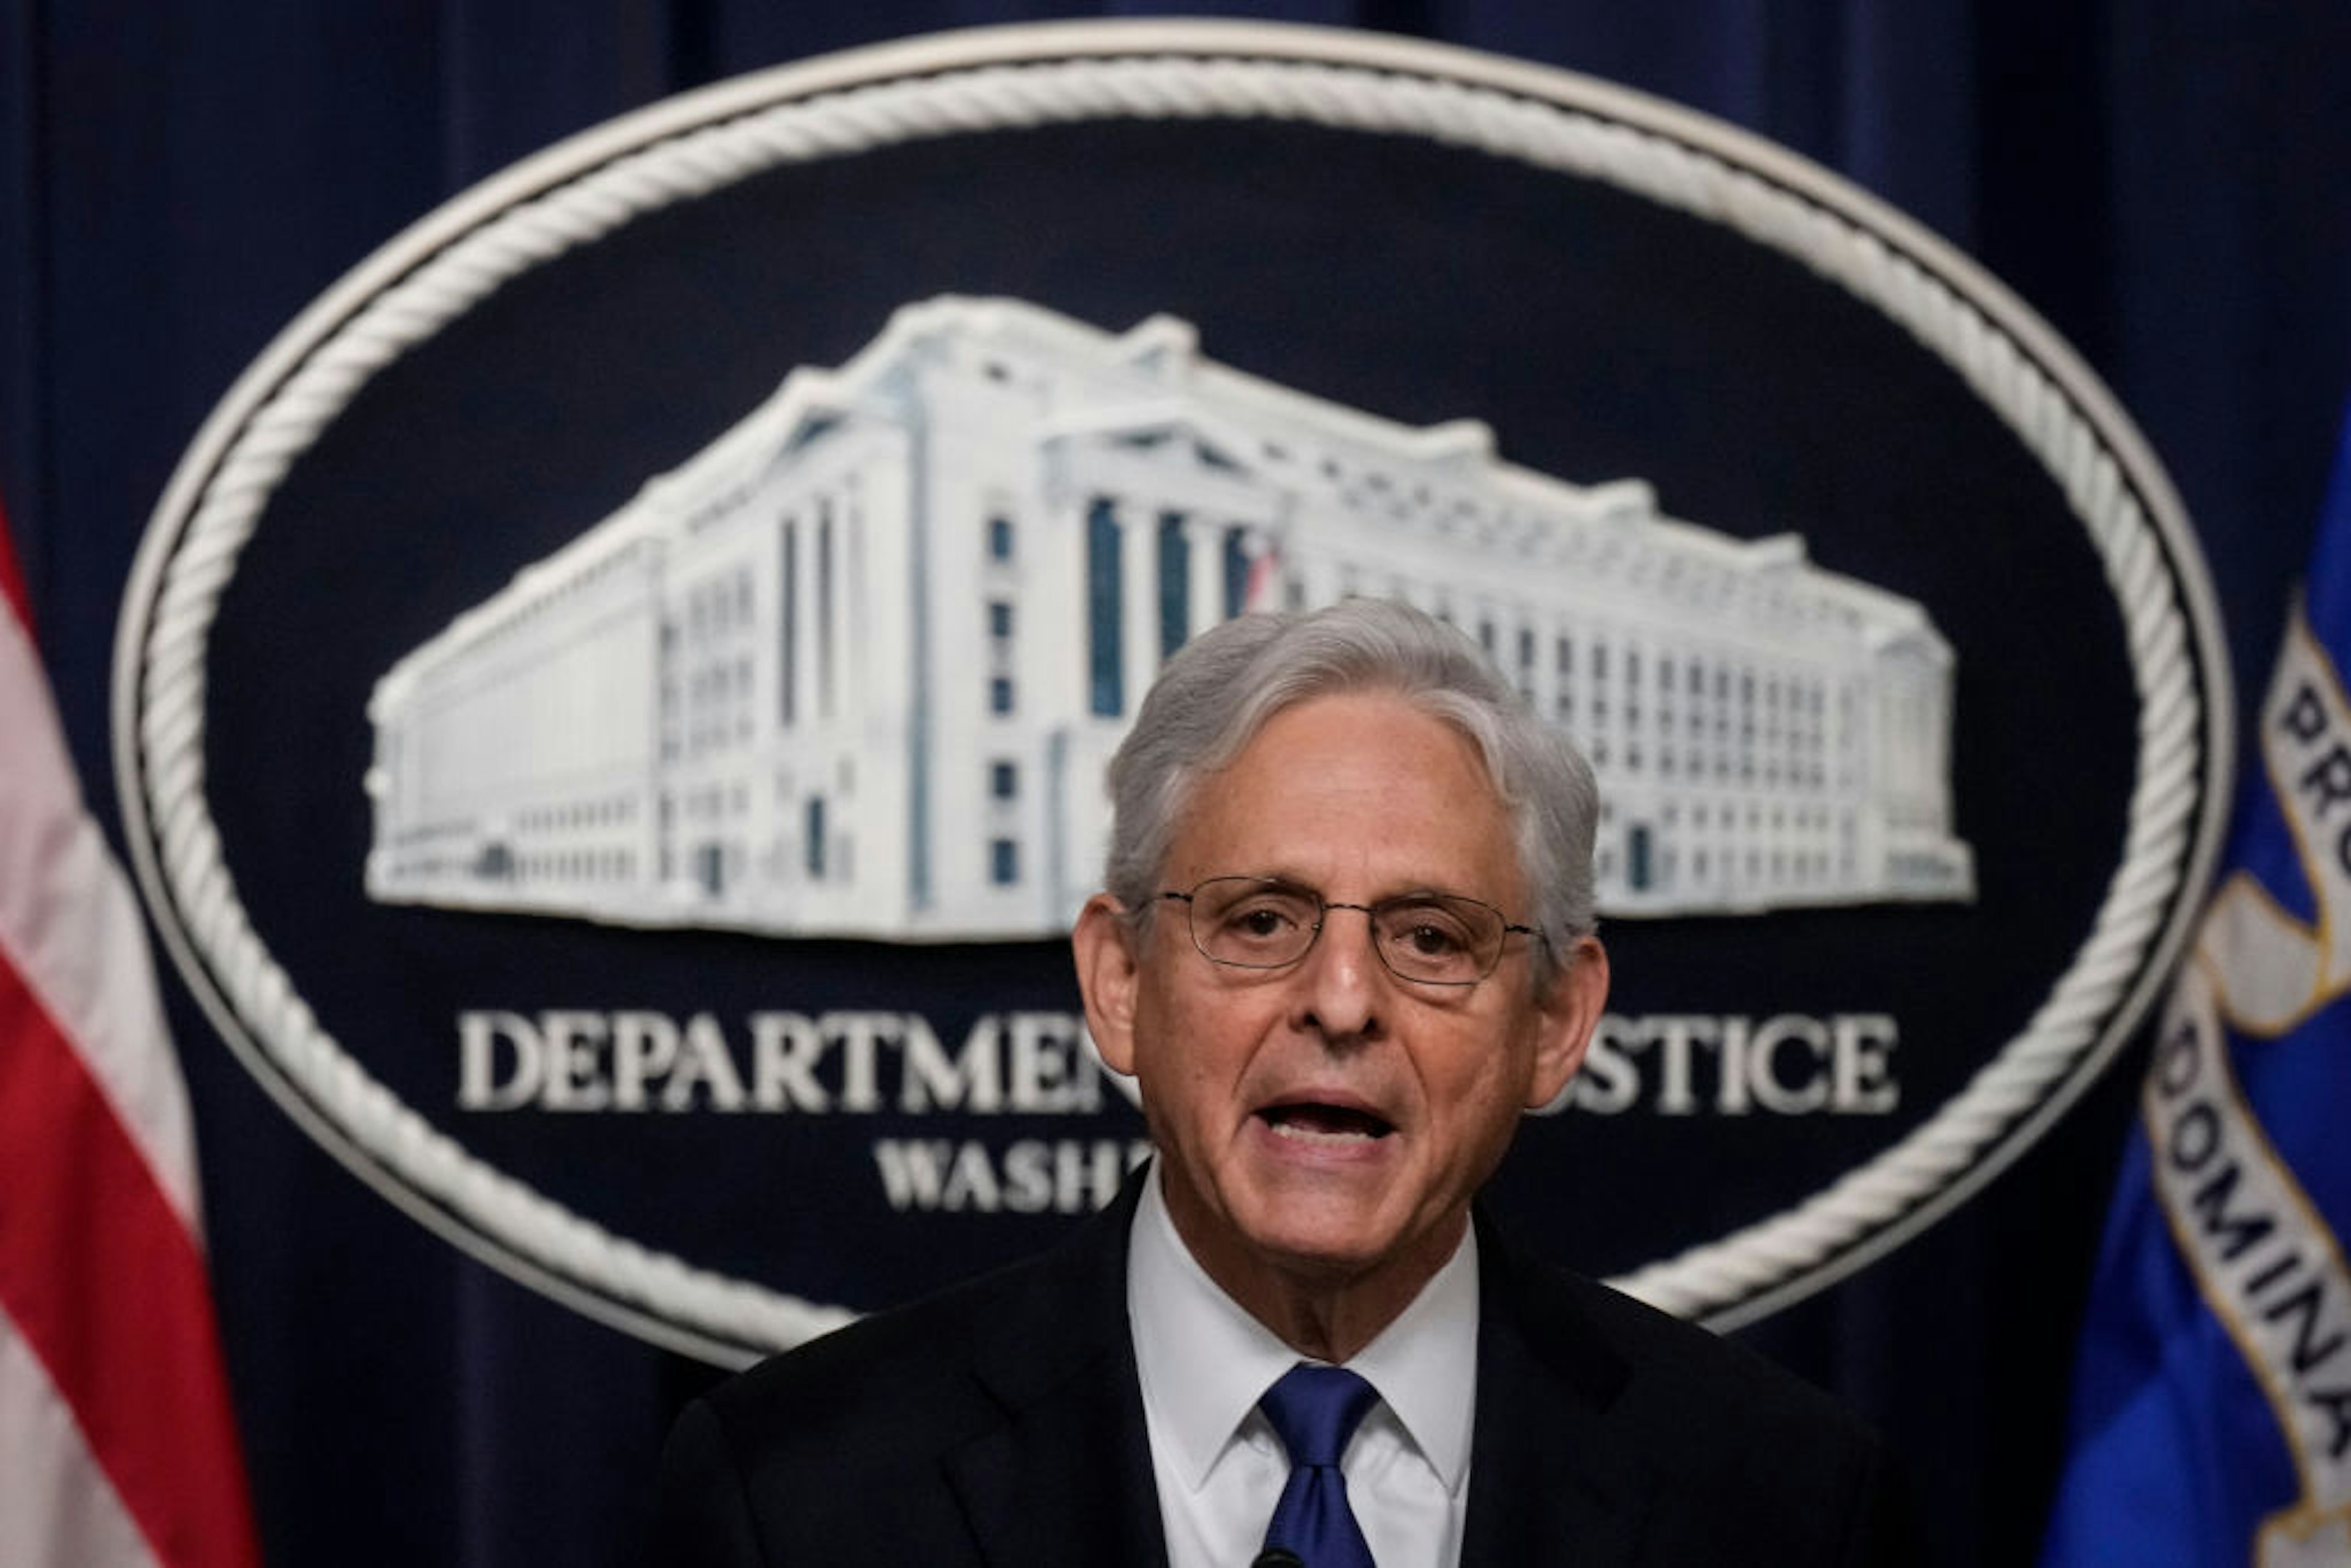 WASHINGTON, DC - AUGUST 11: U.S. Attorney General Merrick Garland delvers a statement at the U.S. Department of Justice August 11, 2023 in Washington, DC. Garland announced that U.S. Attorney David Weiss will be appointed special counsel in the ongoing probe of Hunter Biden, the son of U.S. President Joe Biden. (Photo by Drew Angerer/Getty Images)